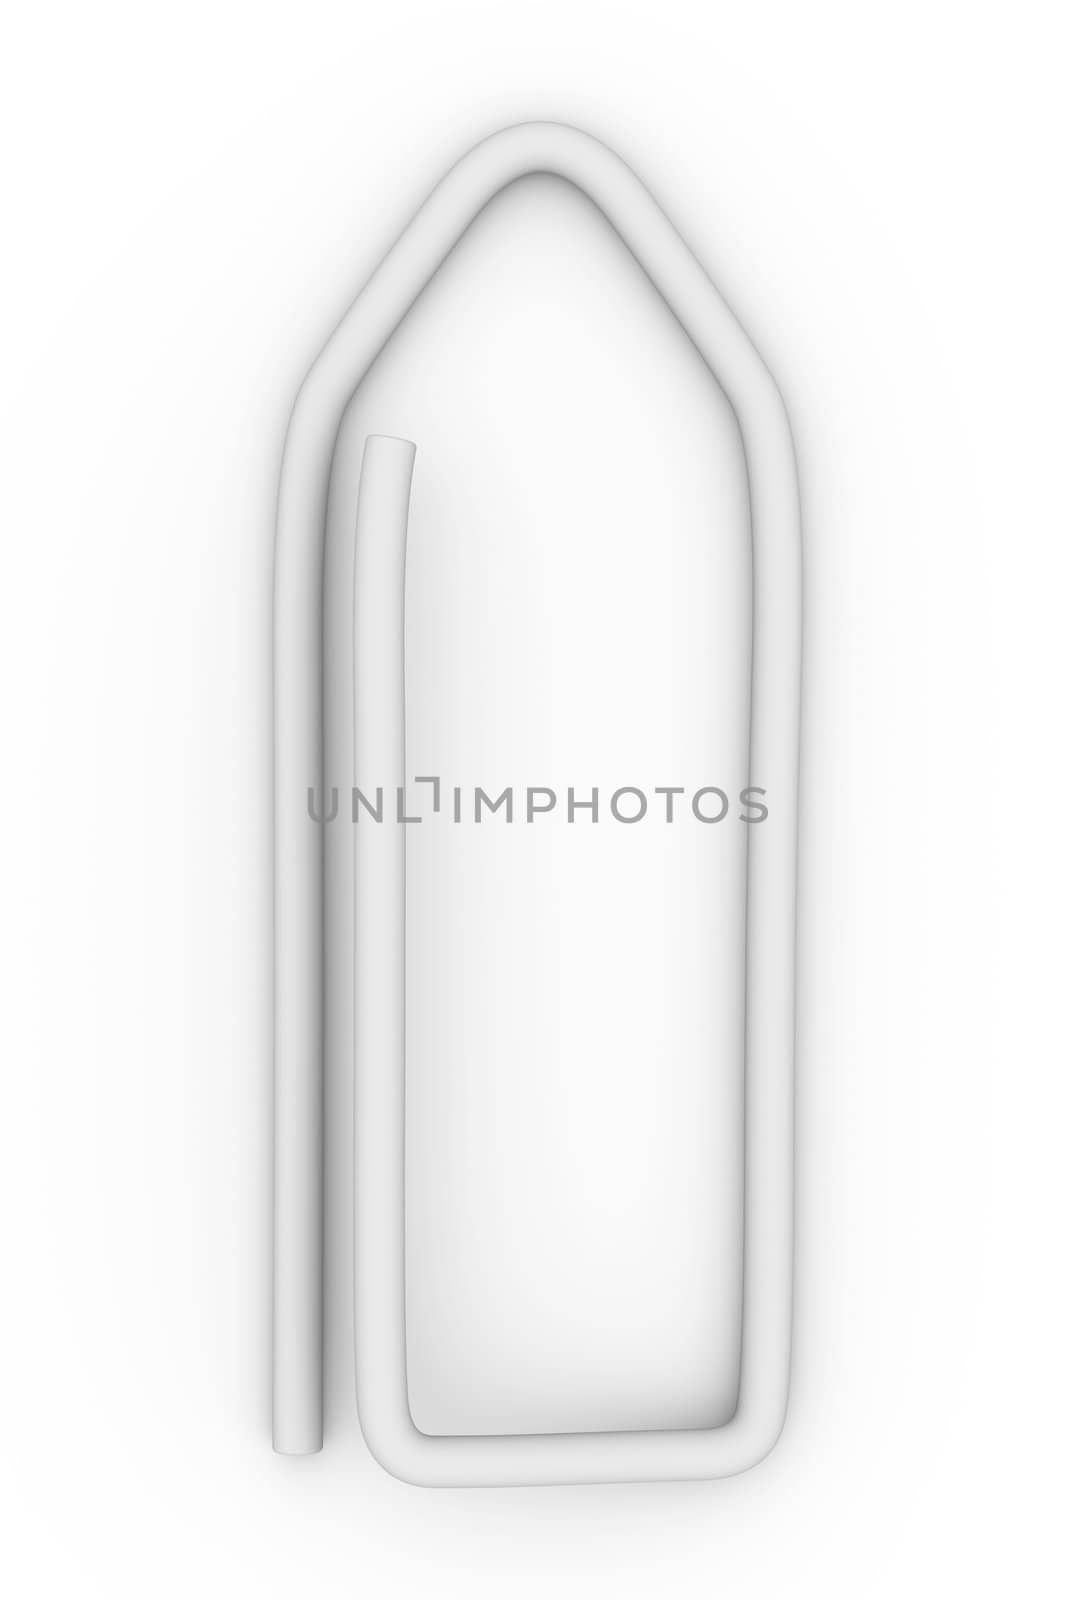 3D rendered Illustration. Isolated on white.
